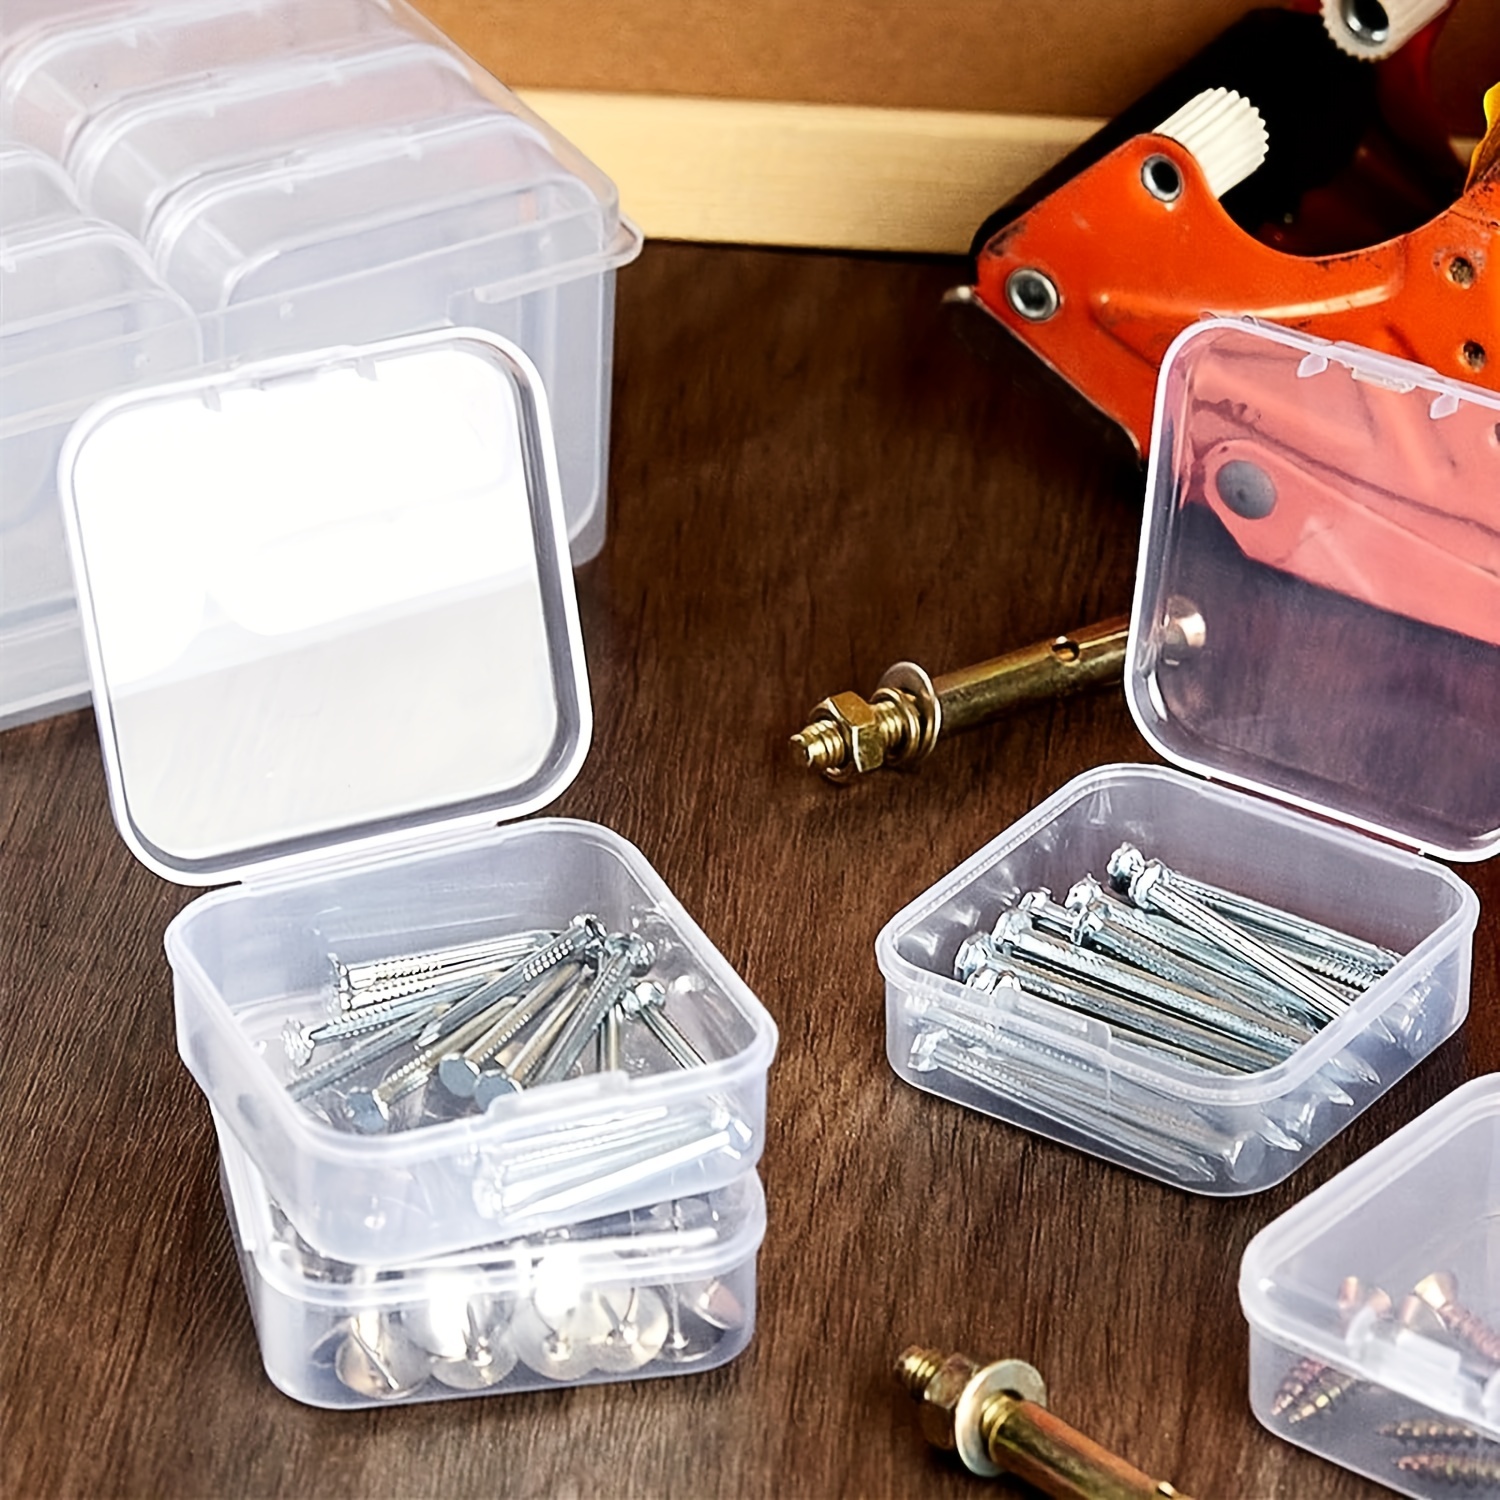 10 Compartment Small Organiser Storage Plastic Box Craft Nail Fuse Beads  Argos Square Storage Container Supplies LX1327 From Lindsay_sz, $0.6